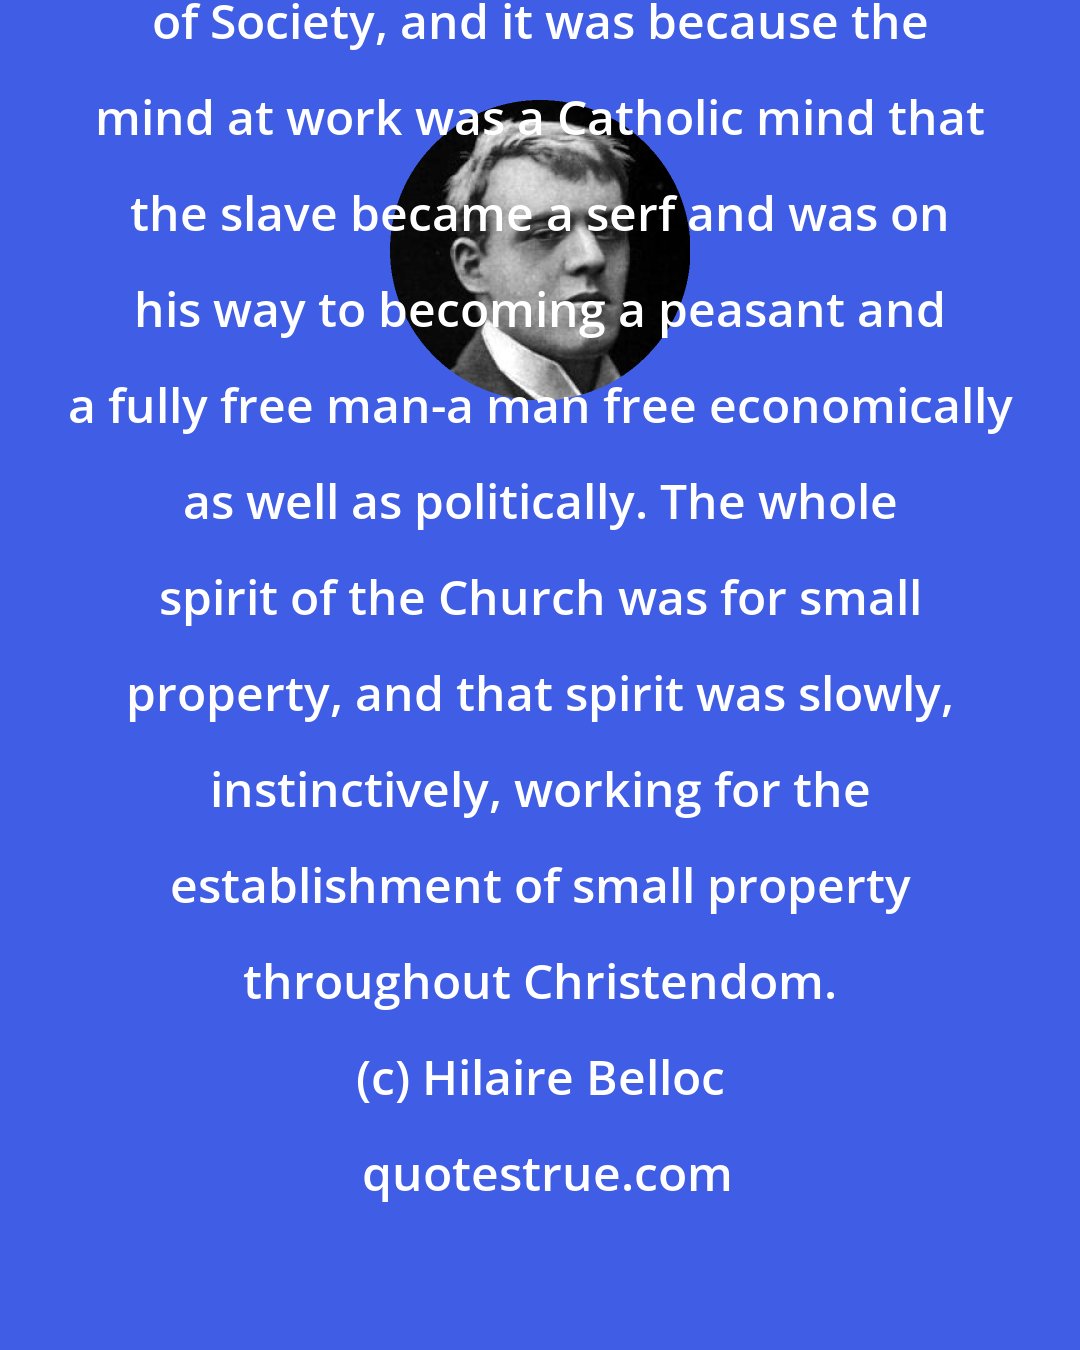 Hilaire Belloc: It is Mind which determines the change of Society, and it was because the mind at work was a Catholic mind that the slave became a serf and was on his way to becoming a peasant and a fully free man-a man free economically as well as politically. The whole spirit of the Church was for small property, and that spirit was slowly, instinctively, working for the establishment of small property throughout Christendom.